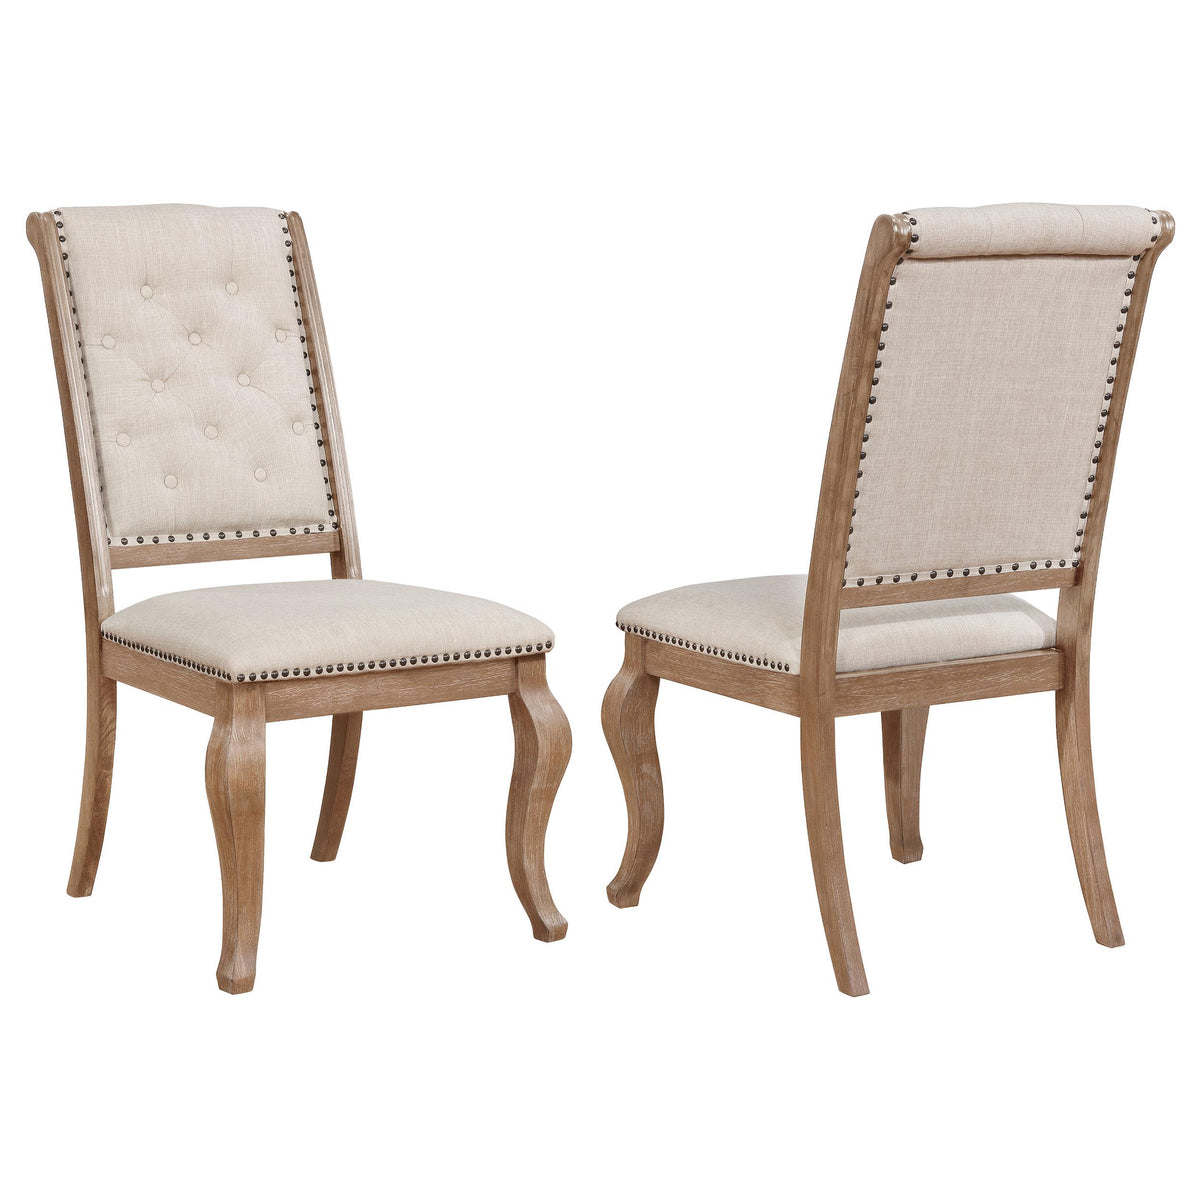 Brockway Tufted Side Chairs Cream and Barley Brown (Set of 2)  Las Vegas Furniture Stores